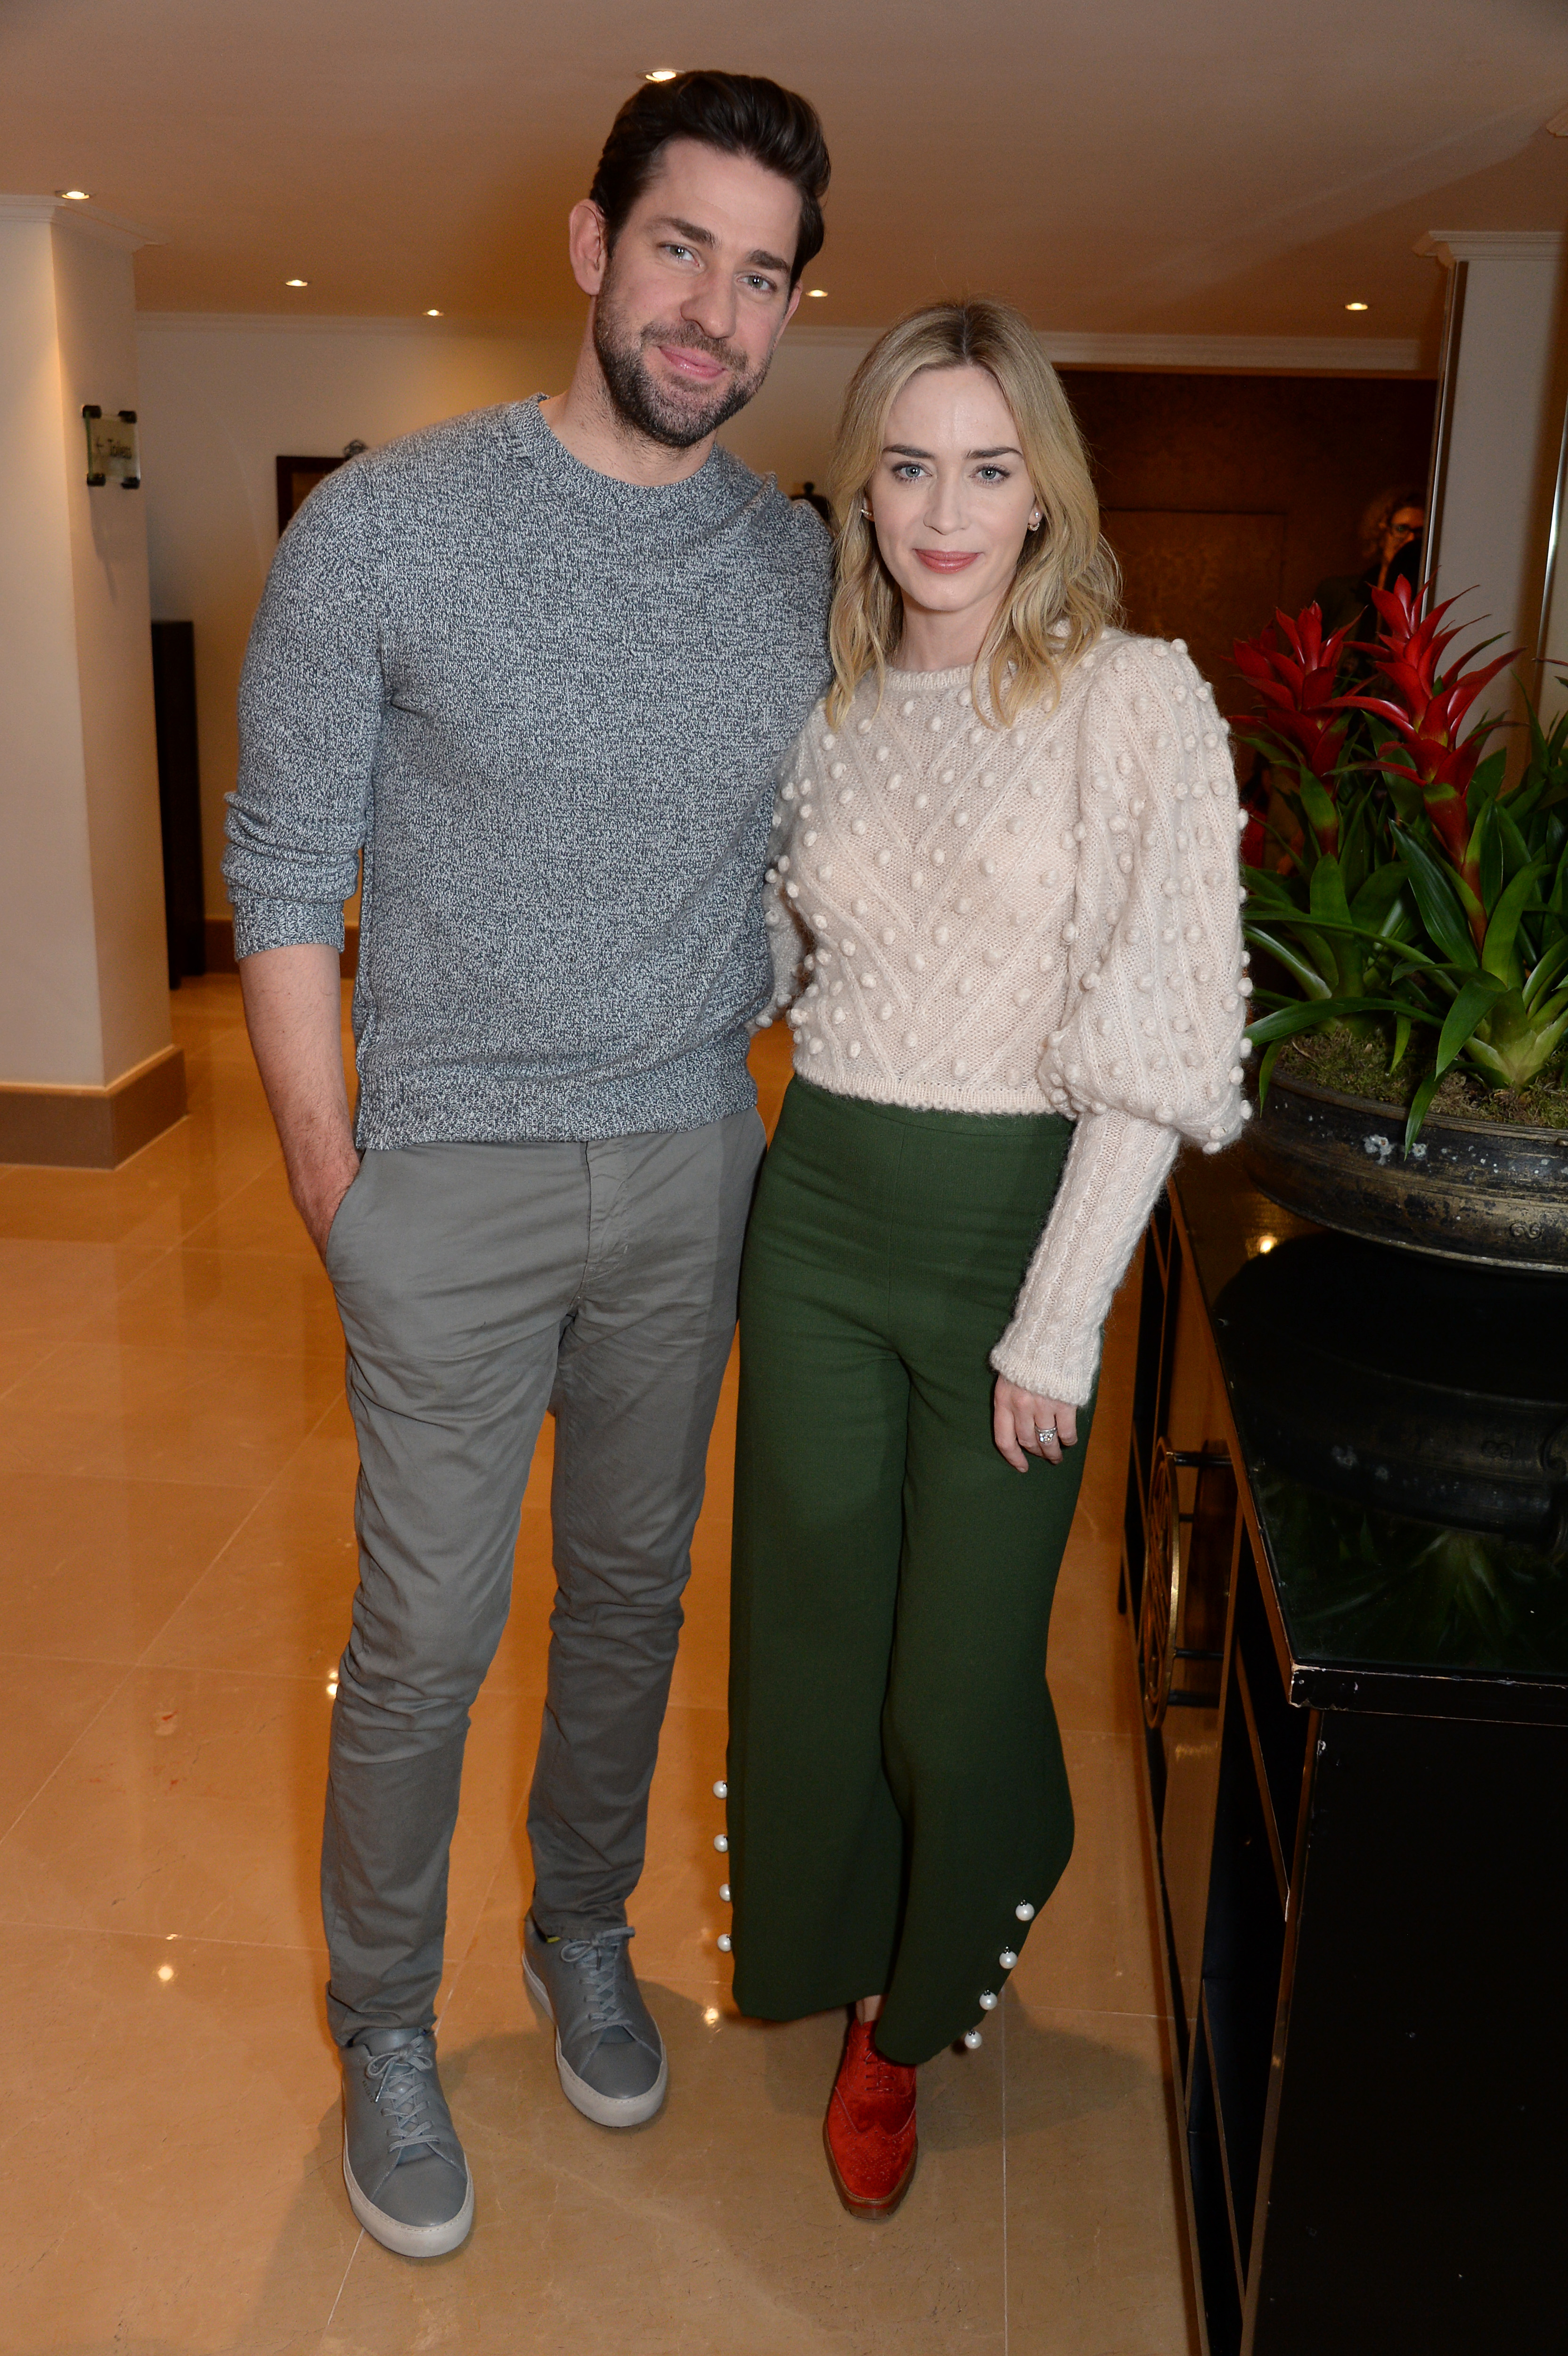 John Krasinski and Emily Blunt at the BAFTA screening of "A Quiet Place" in London, 2018 | Source: Getty Images